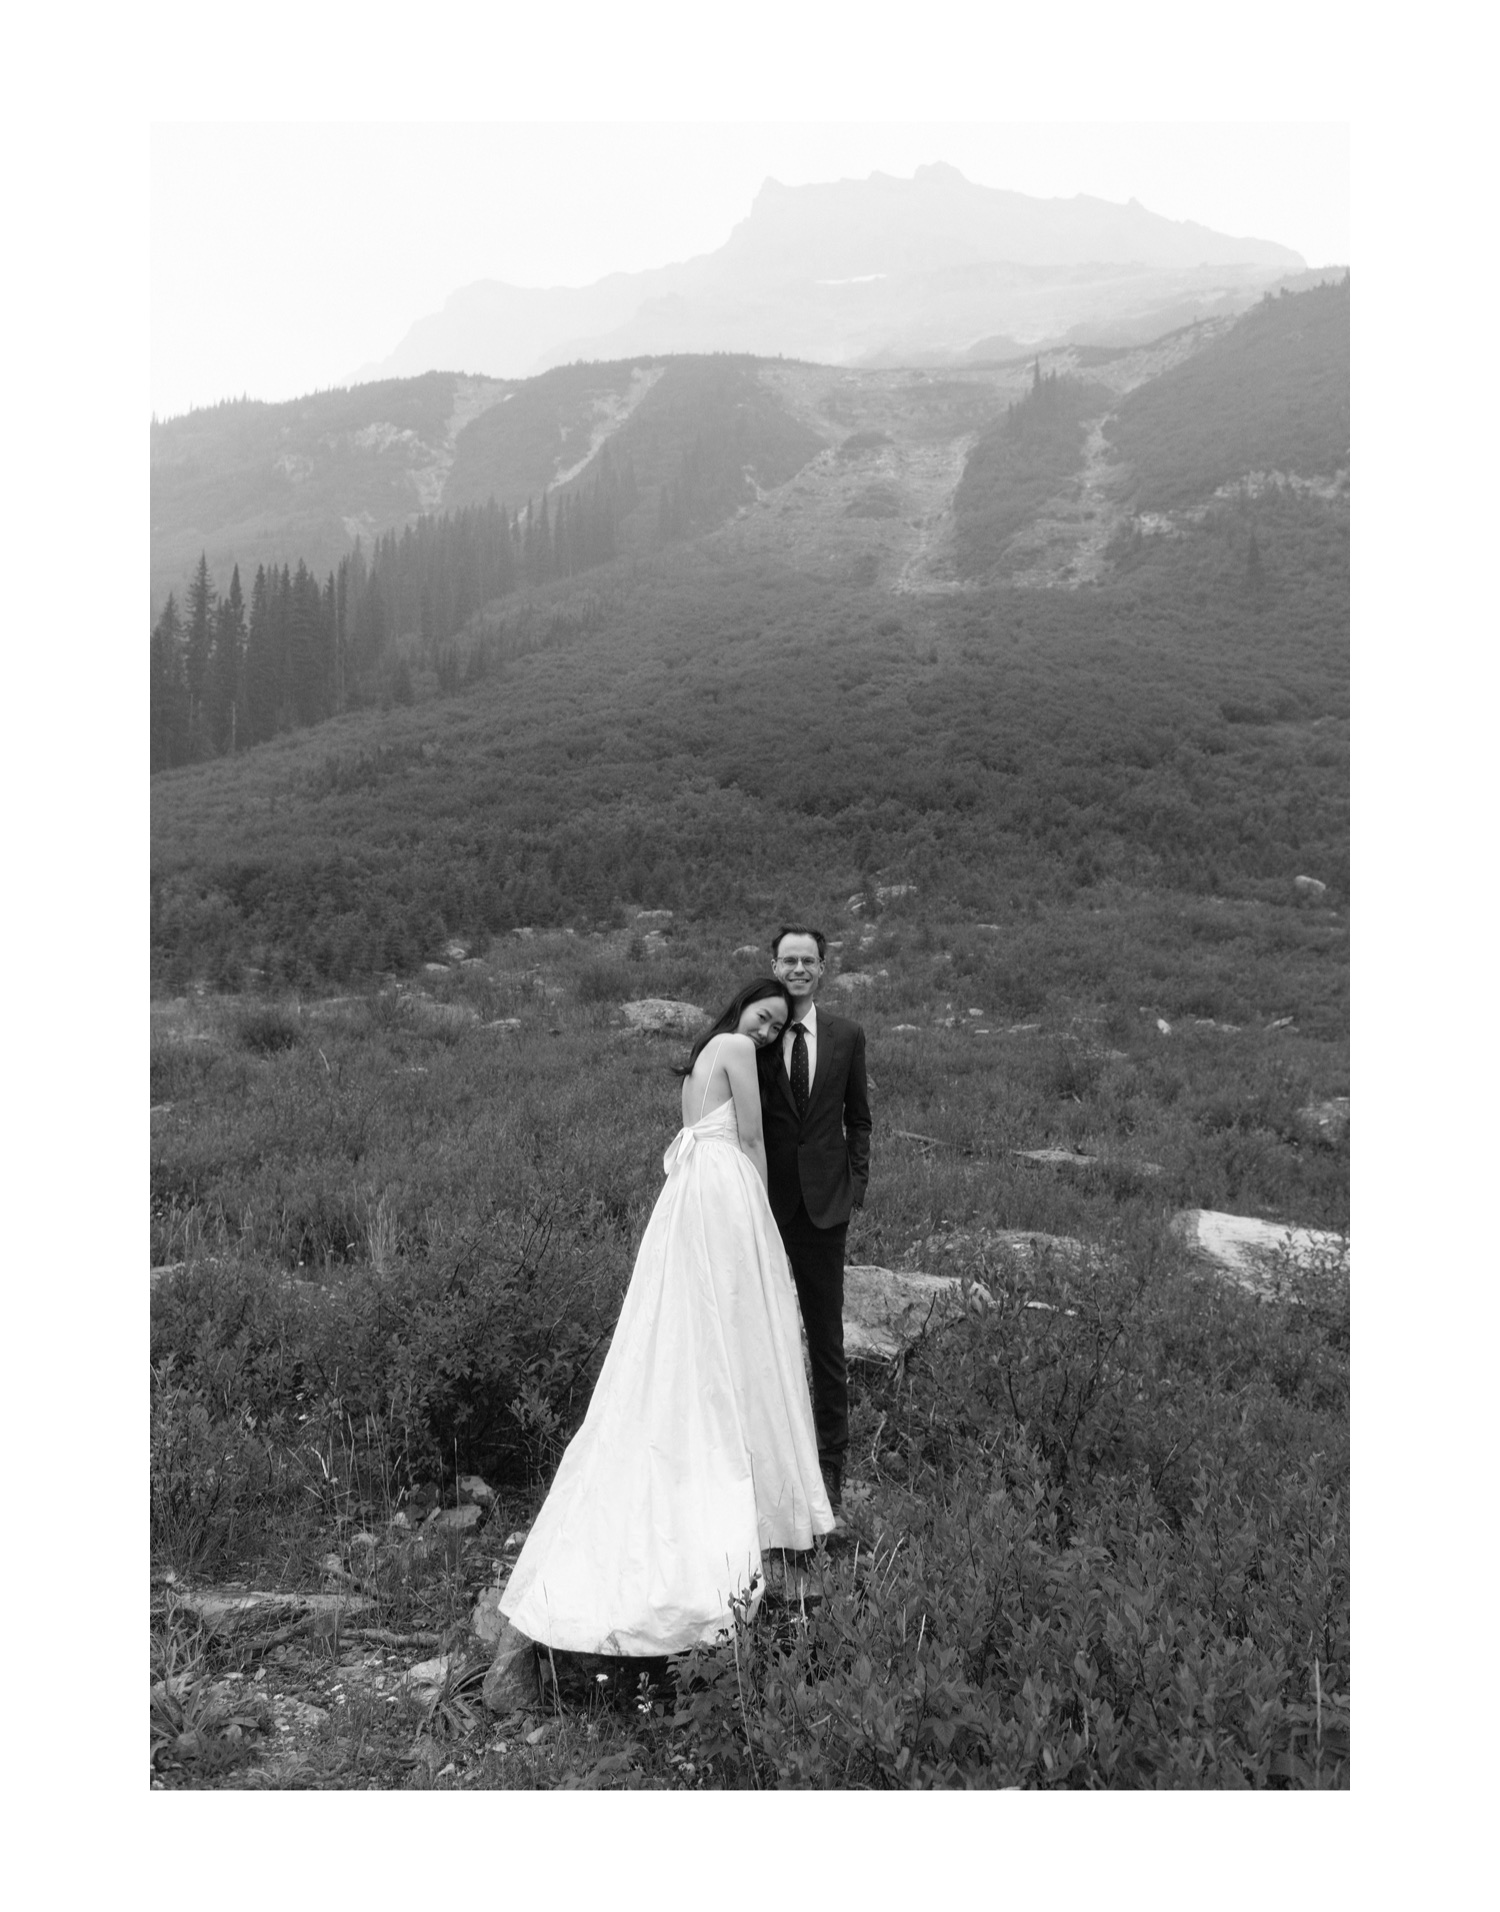 Timeless editorial wedding portraiture in an avalanche path in Banff National Park